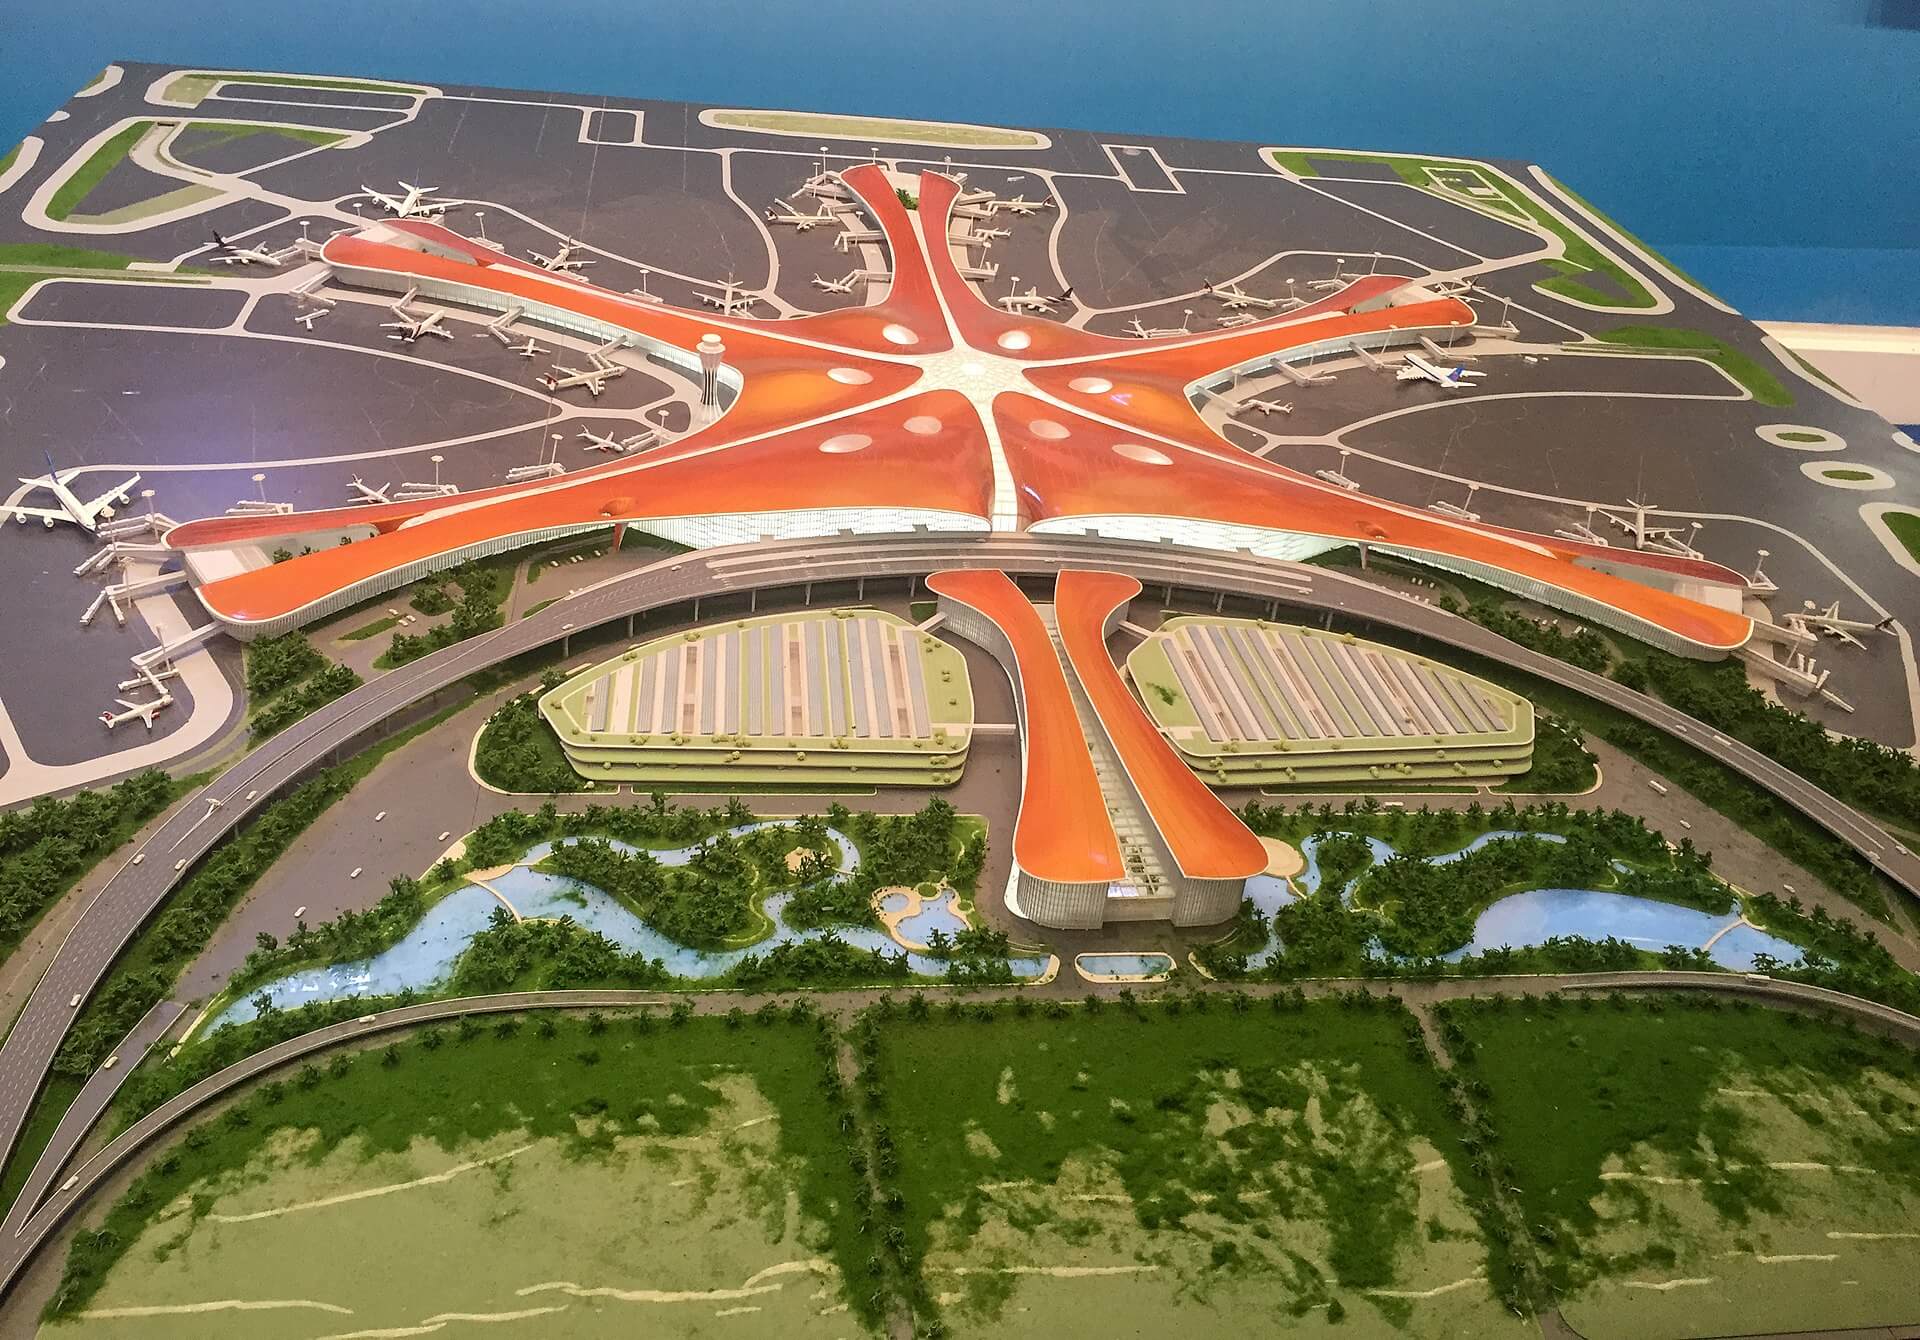 1920px-Model_of_Beijing_New_Airport_at_the_20171015150600_Year_Achieves_Exhibition_XNUMX